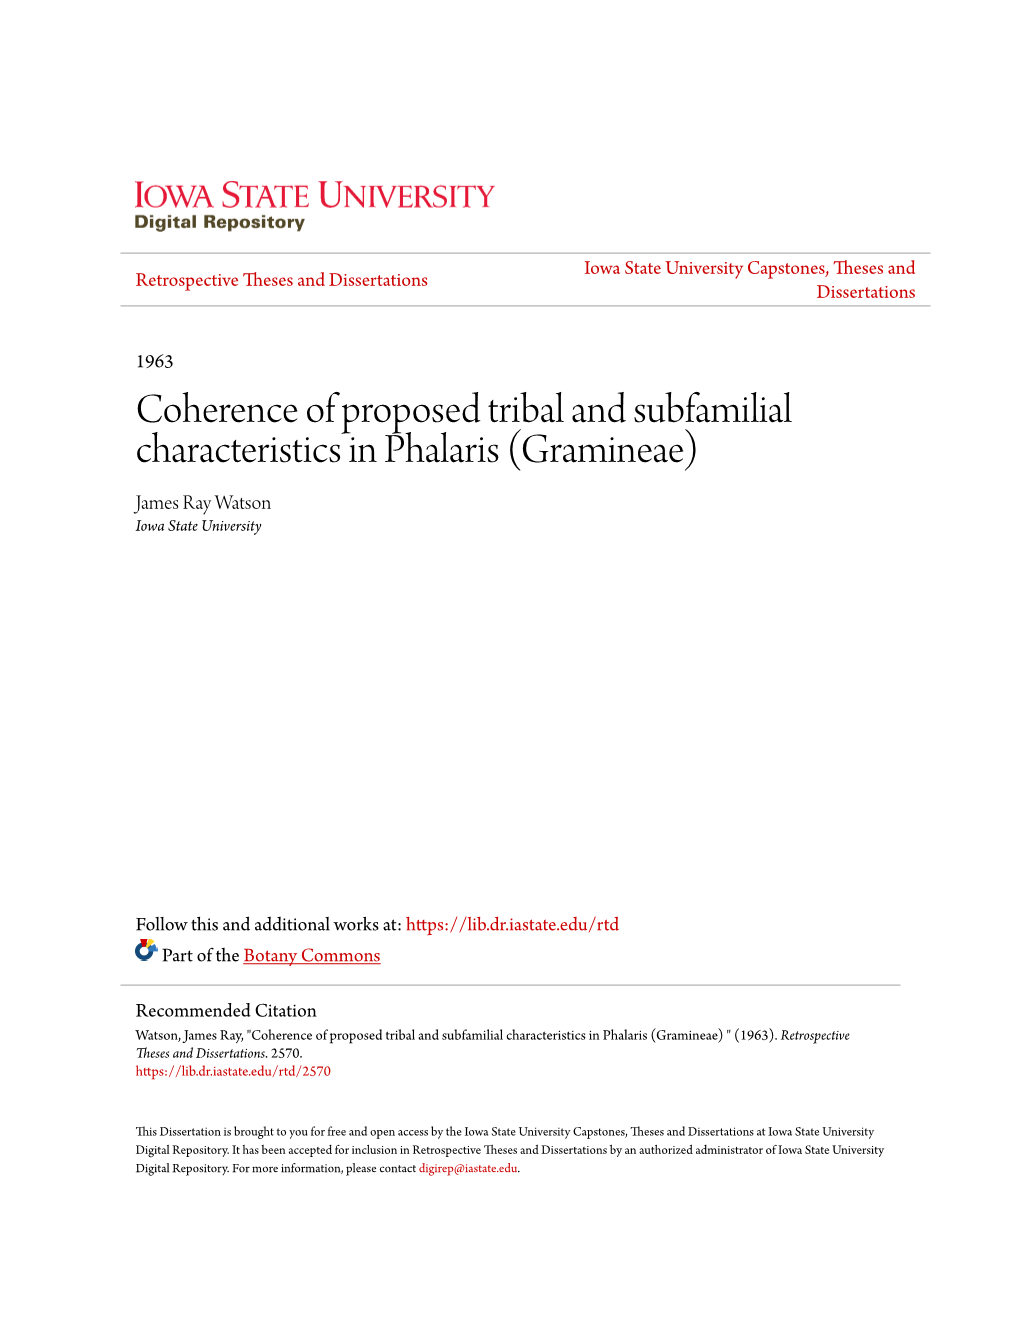 Coherence of Proposed Tribal and Subfamilial Characteristics in Phalaris (Gramineae) James Ray Watson Iowa State University